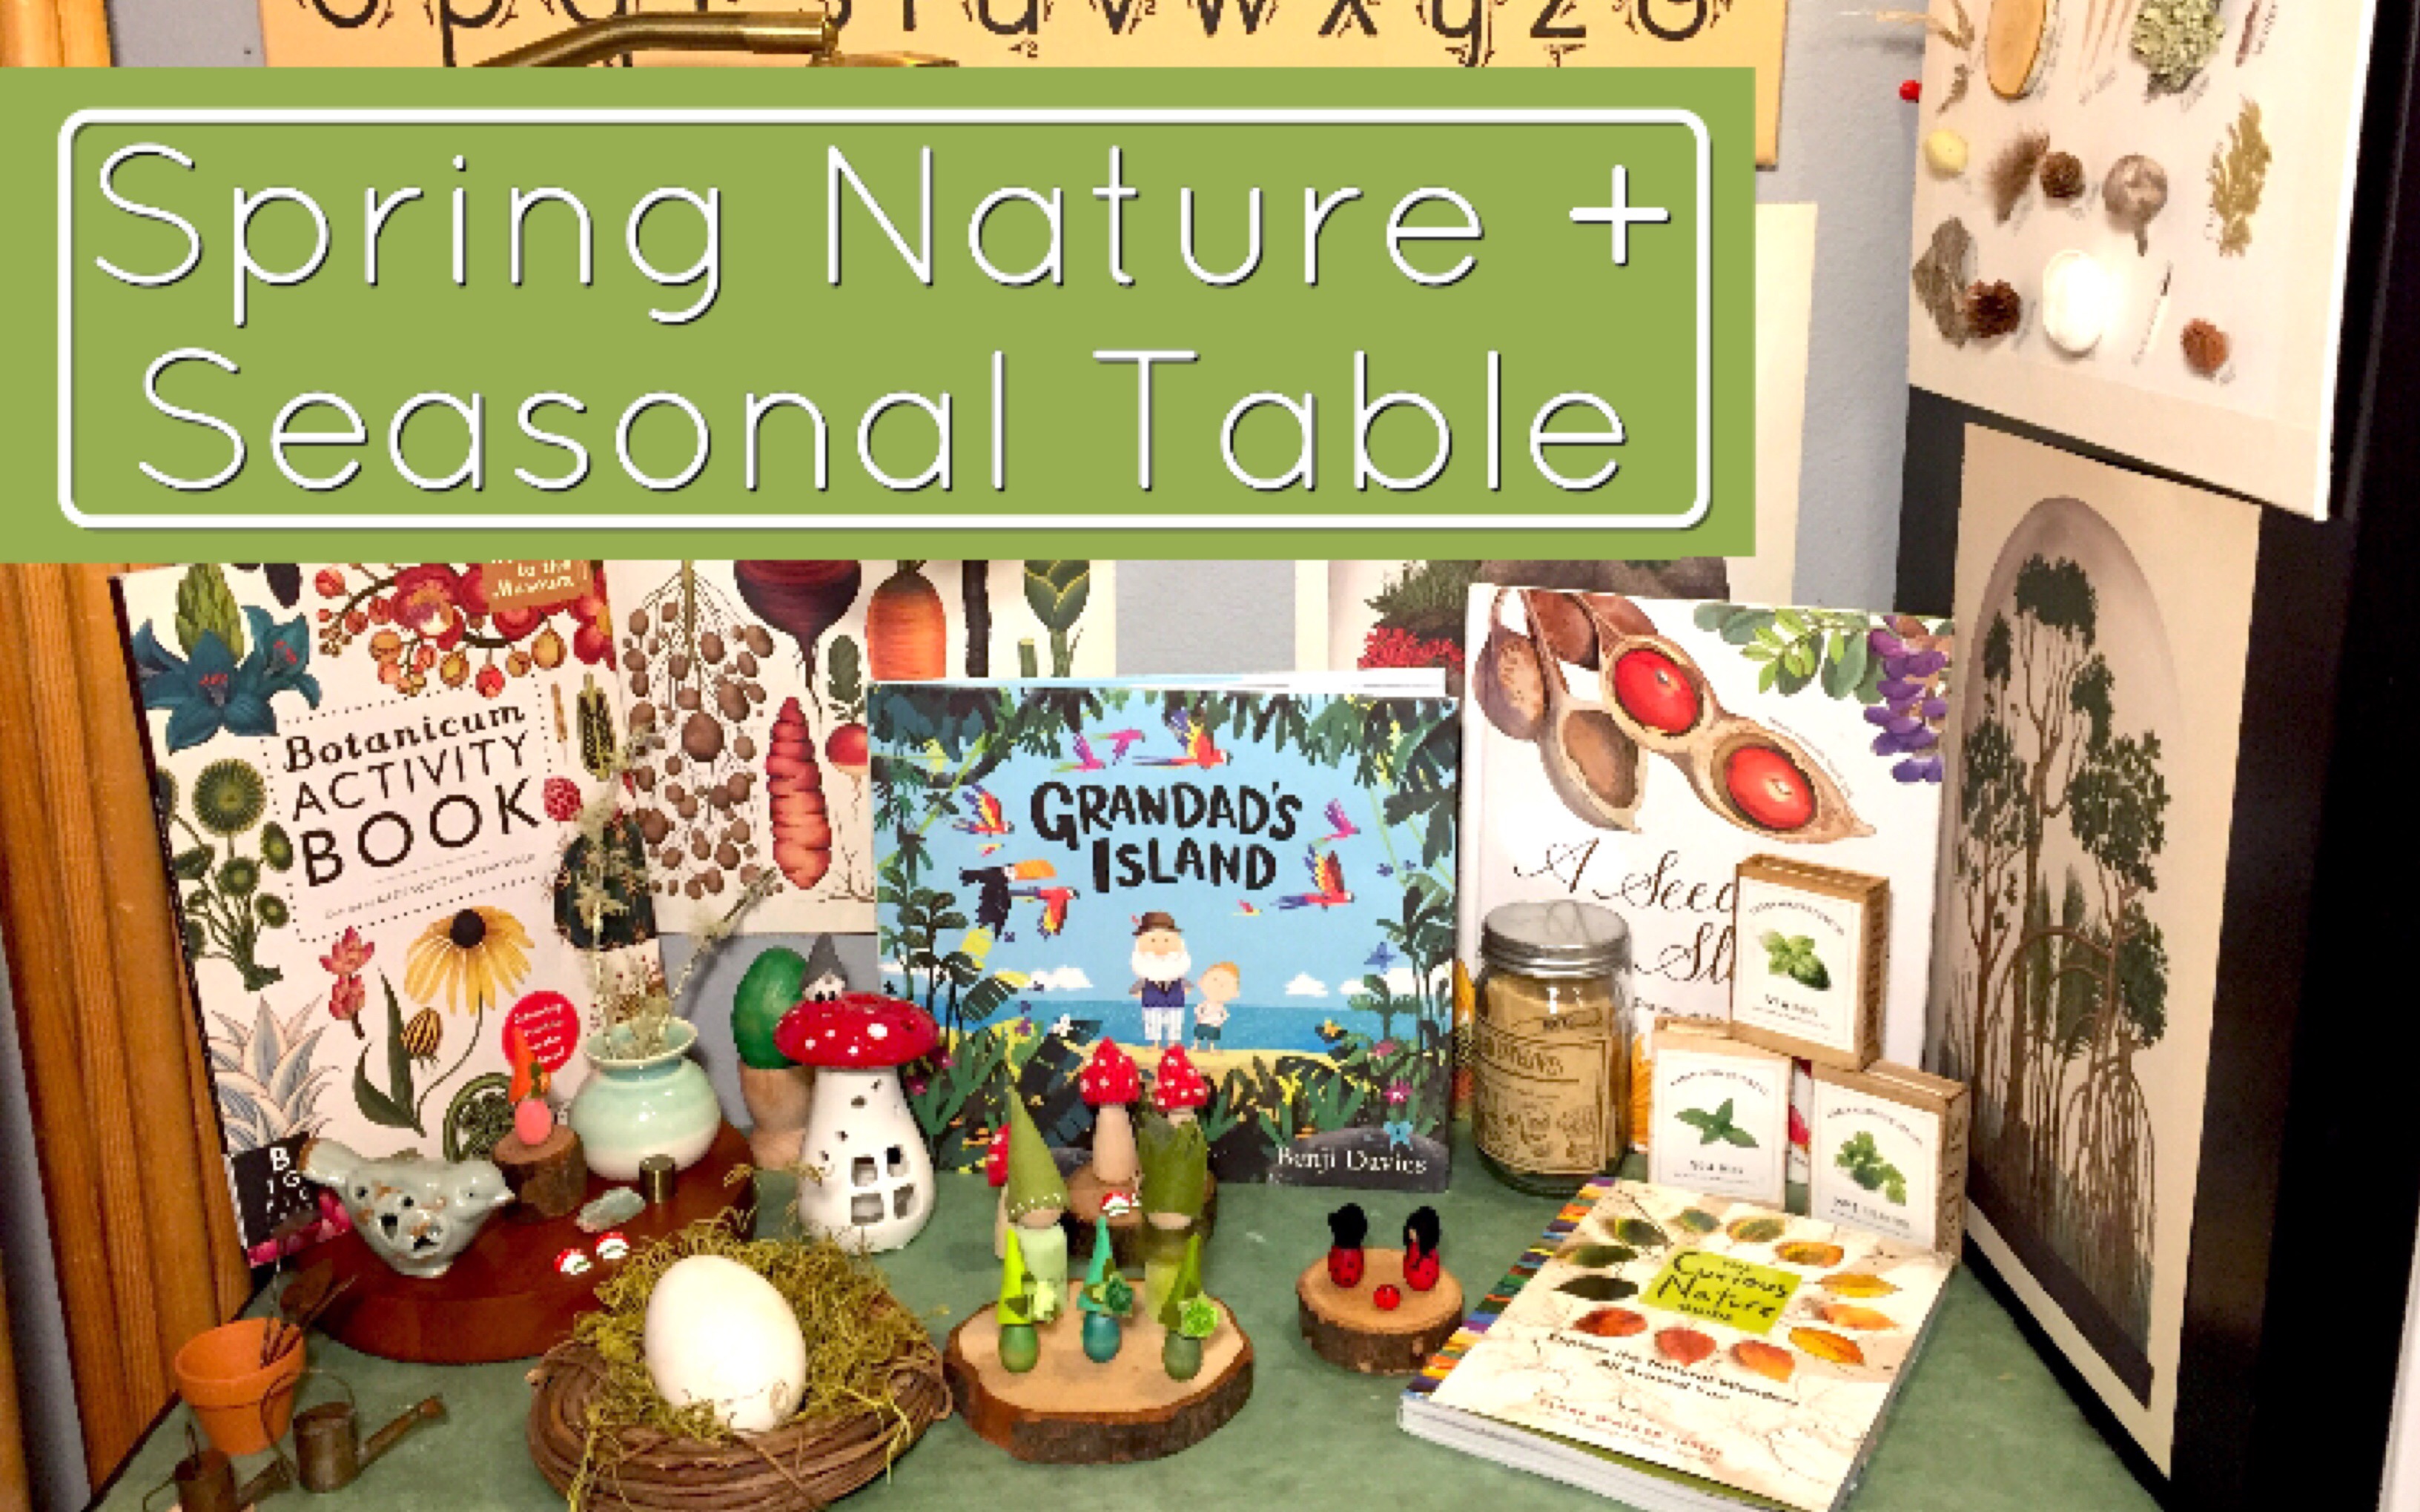 SPRING NATURE TABLE